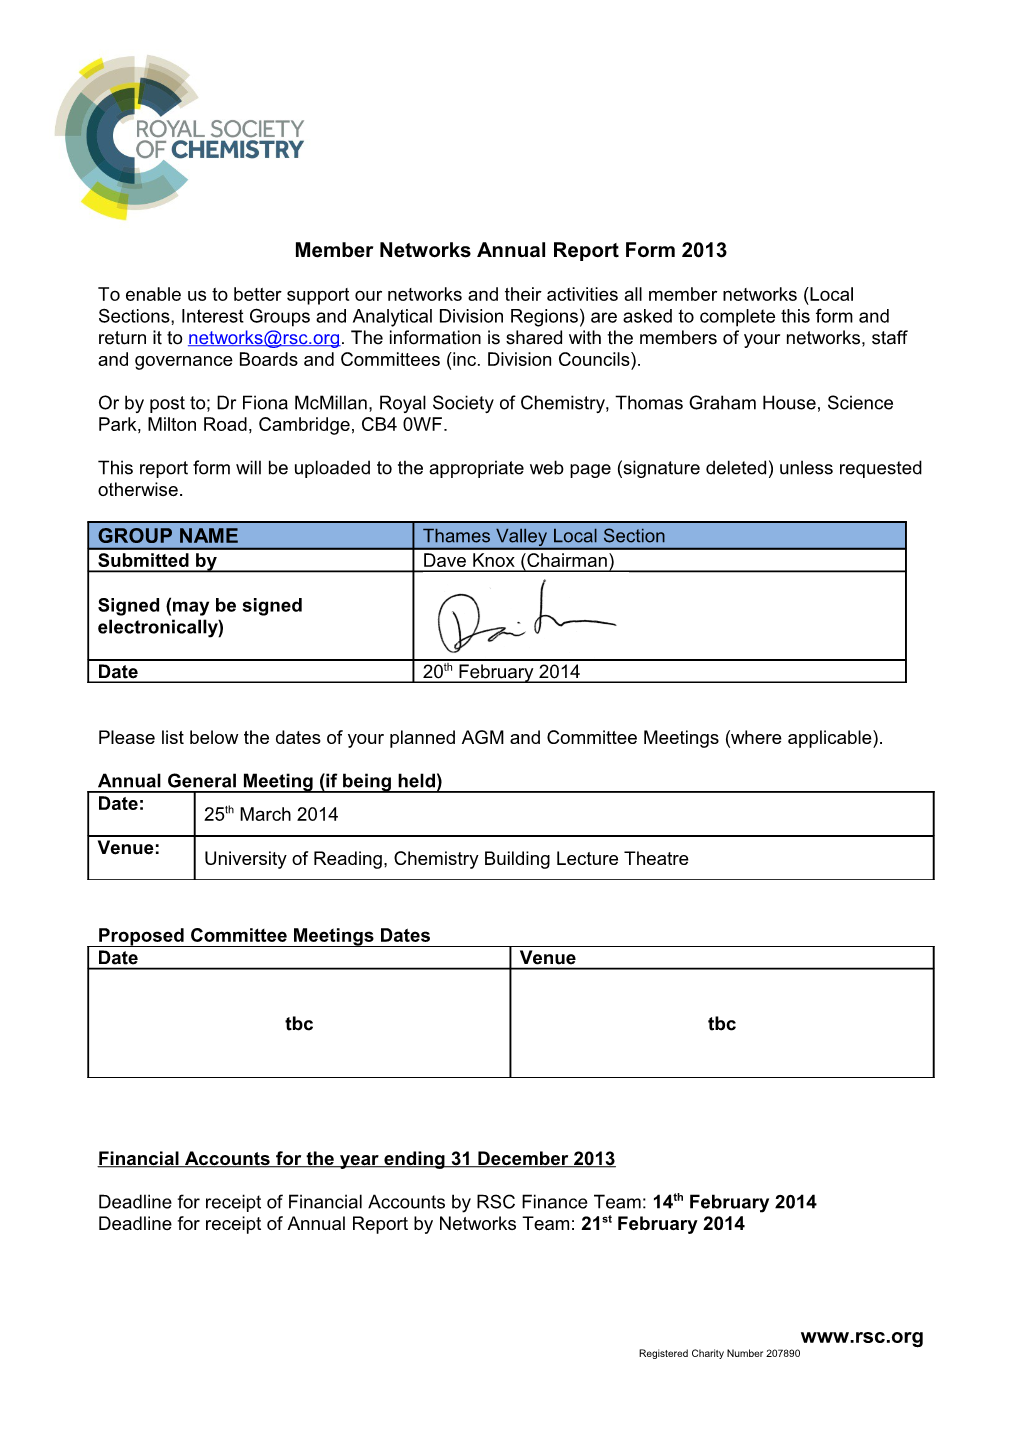 Member Networks Annual Report Form 2013